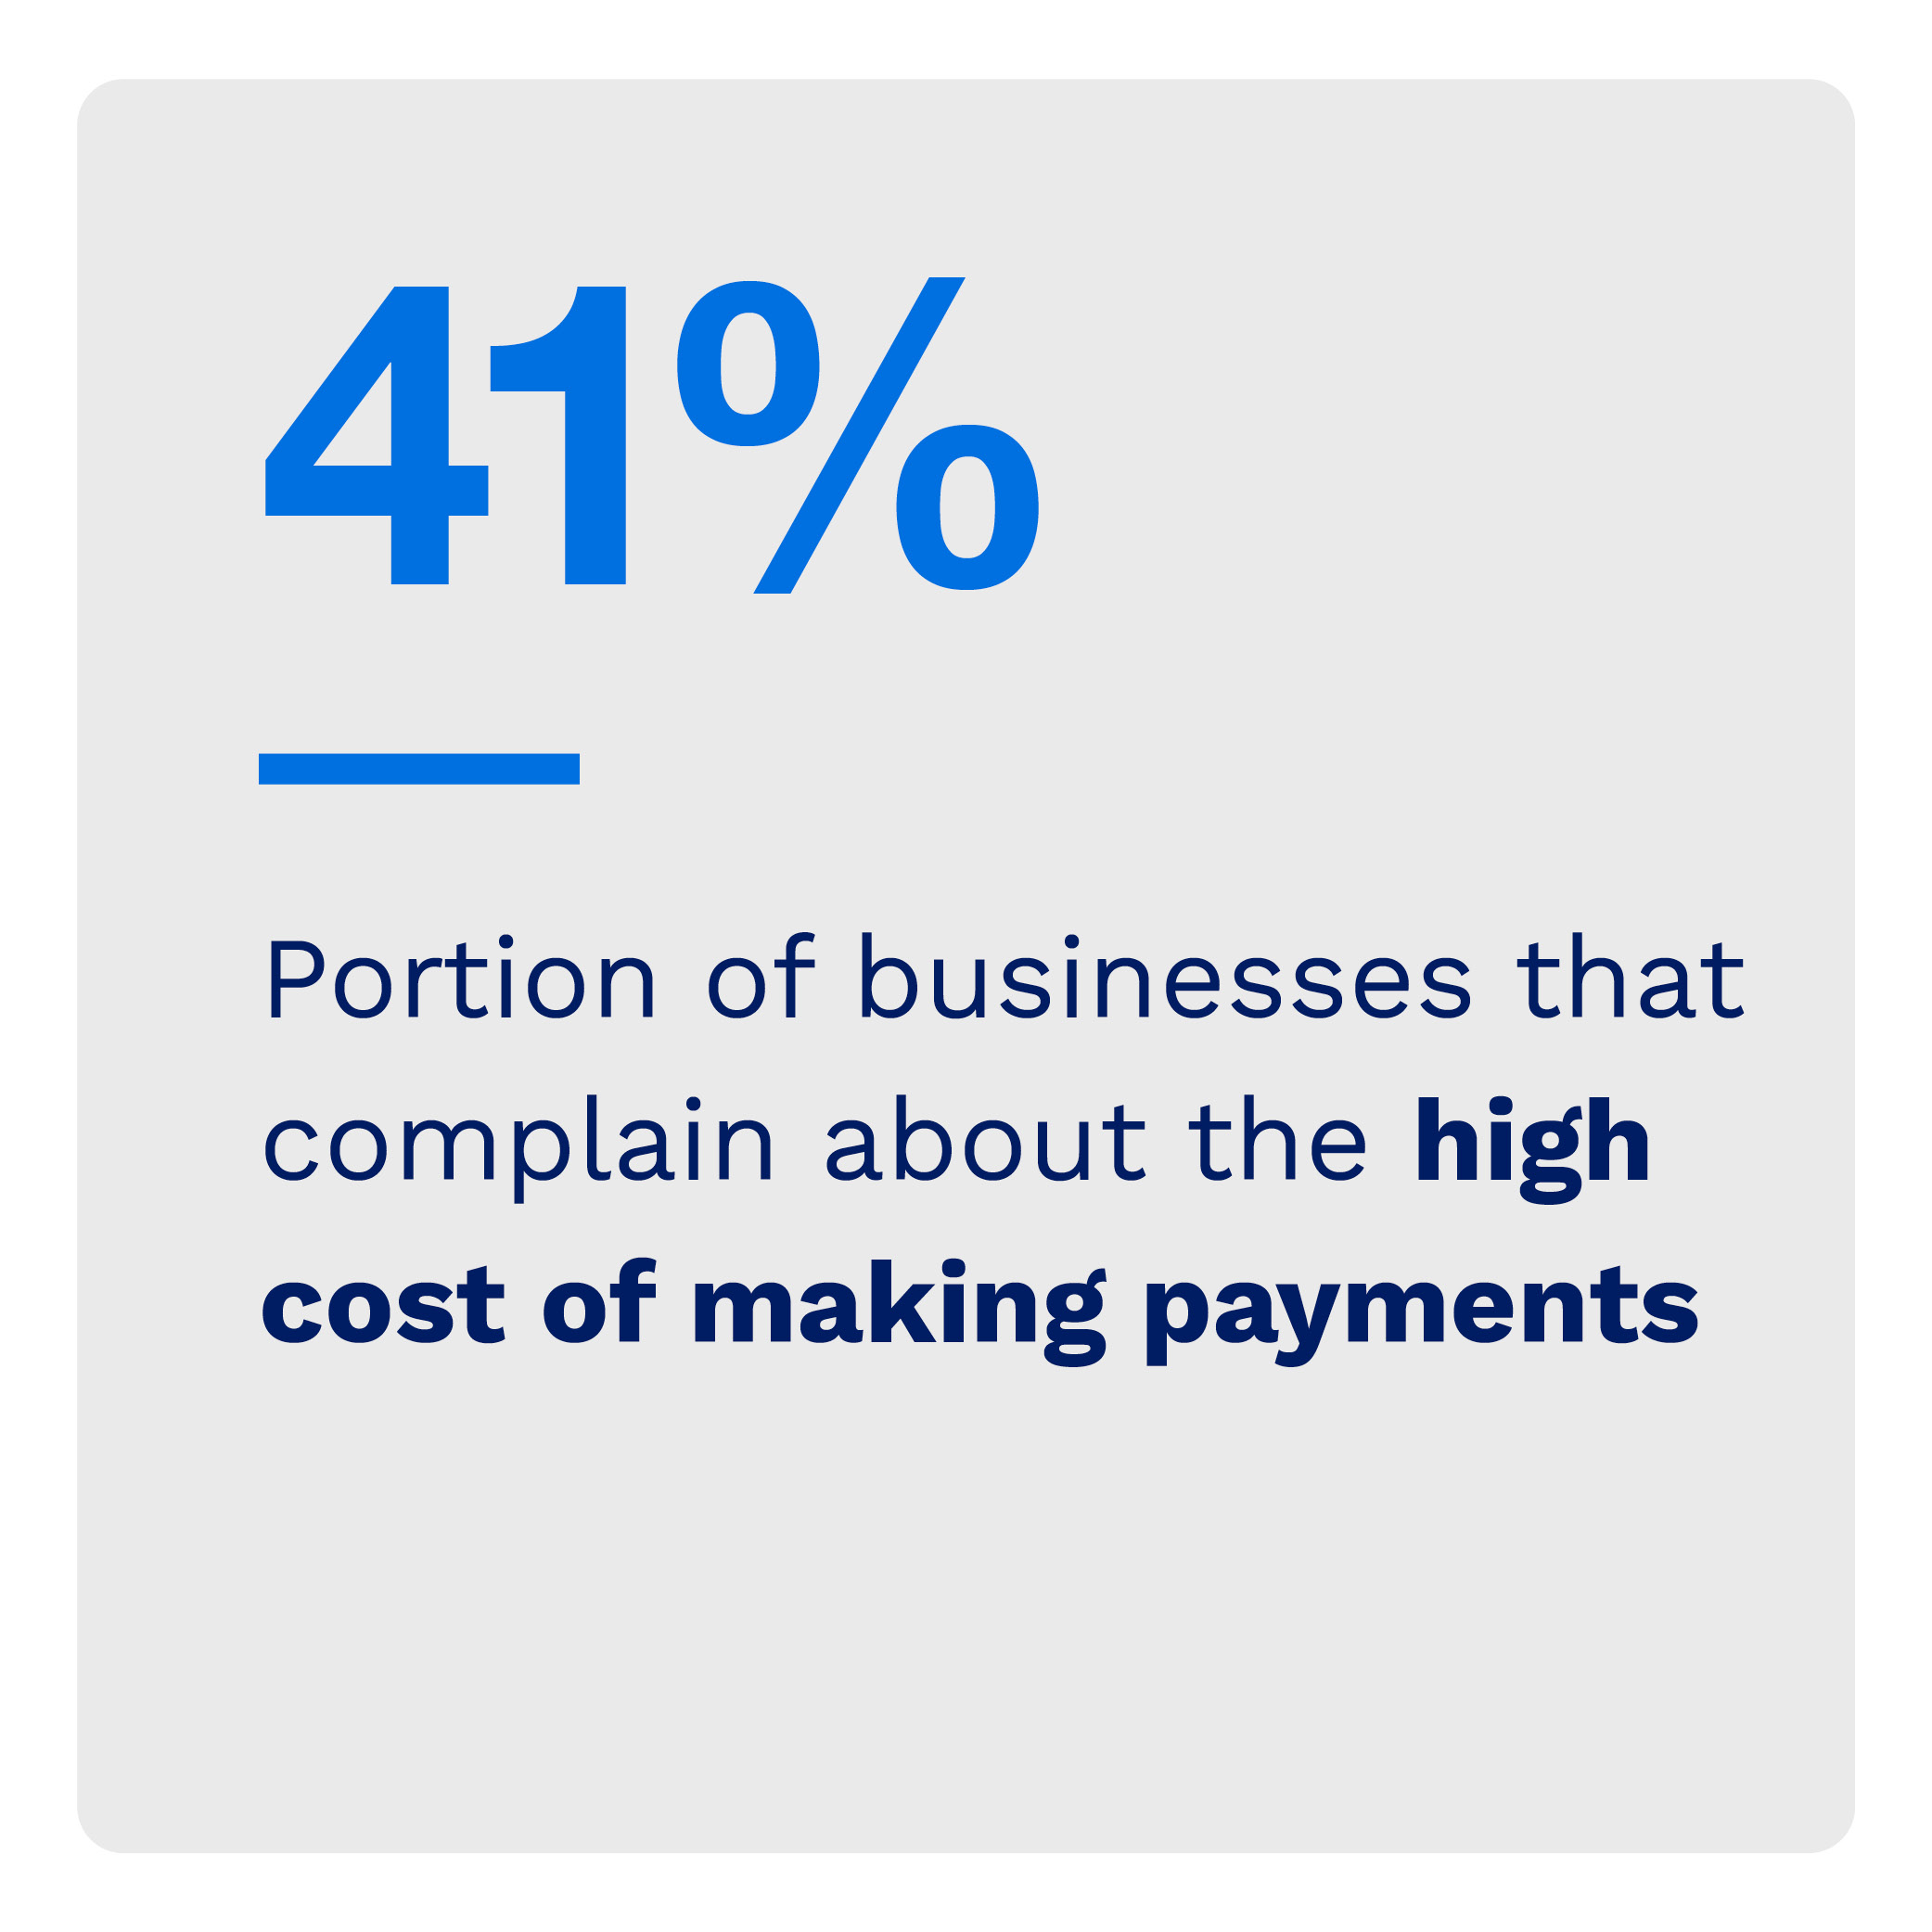 41%: Portion of businesses that complain about the high cost of making payments